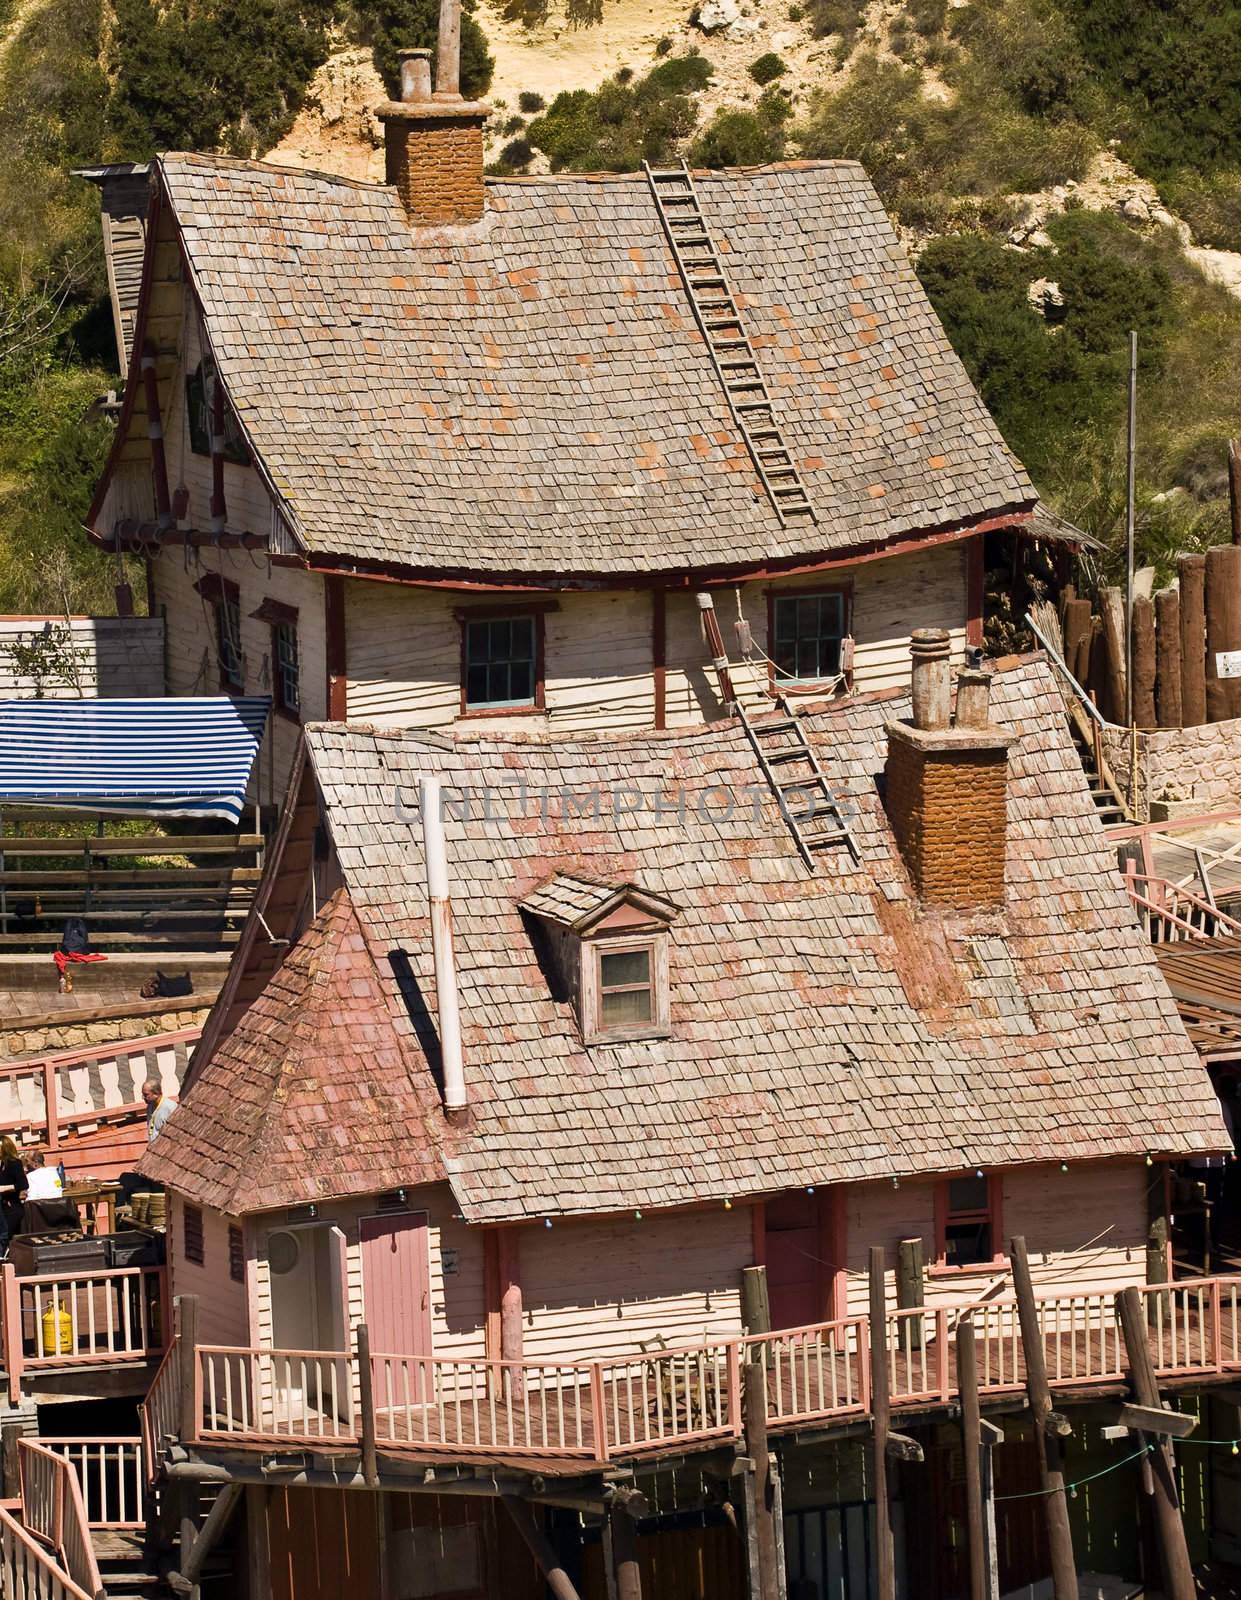 Cabins and houses built of wood in Malta